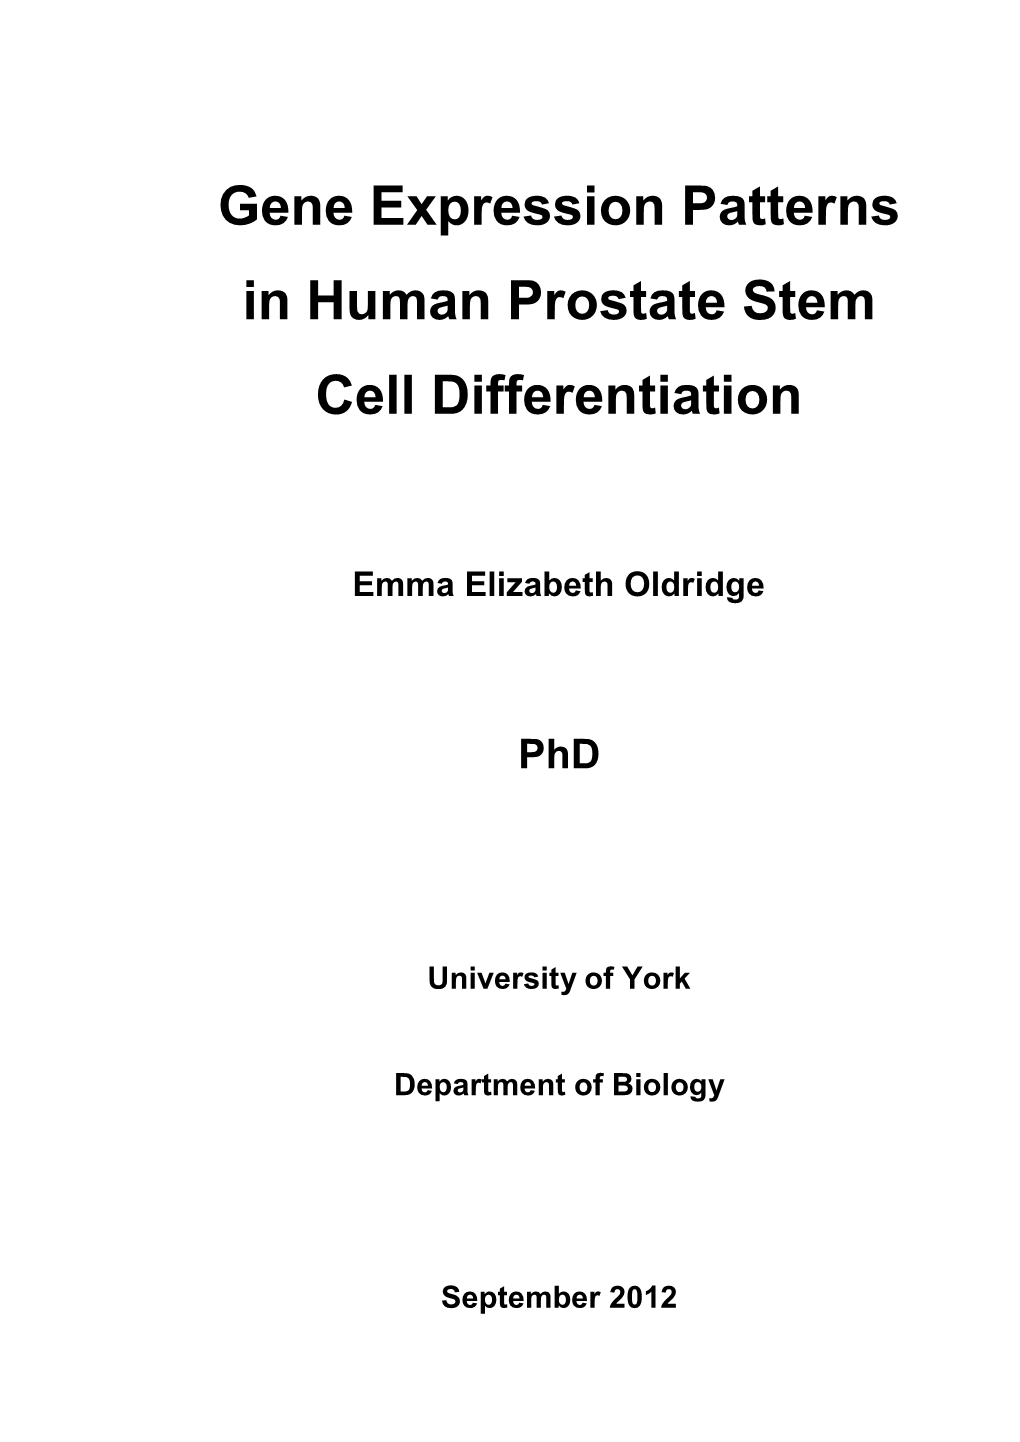 Gene Expression Patterns in Human Prostate Stem Cell Differentiation